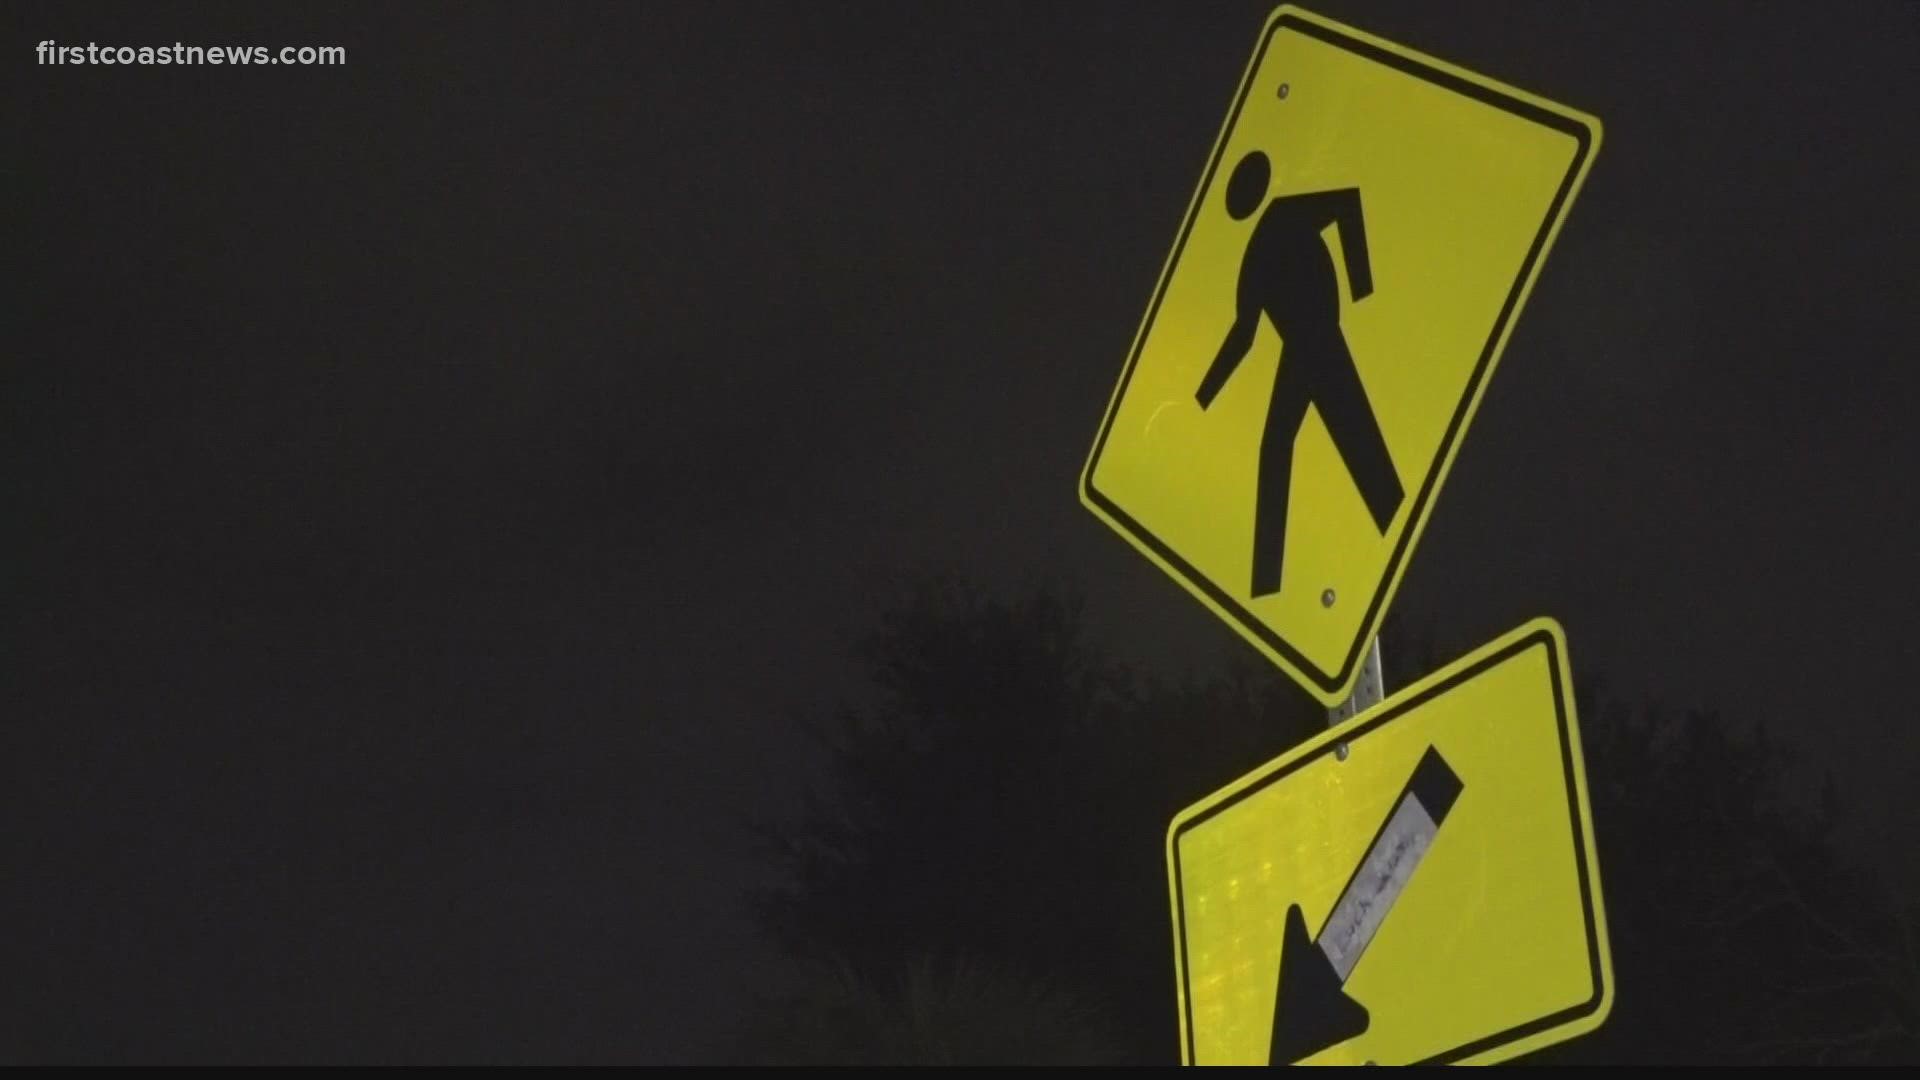 Residents calling for more traffic signs and speed bumps.